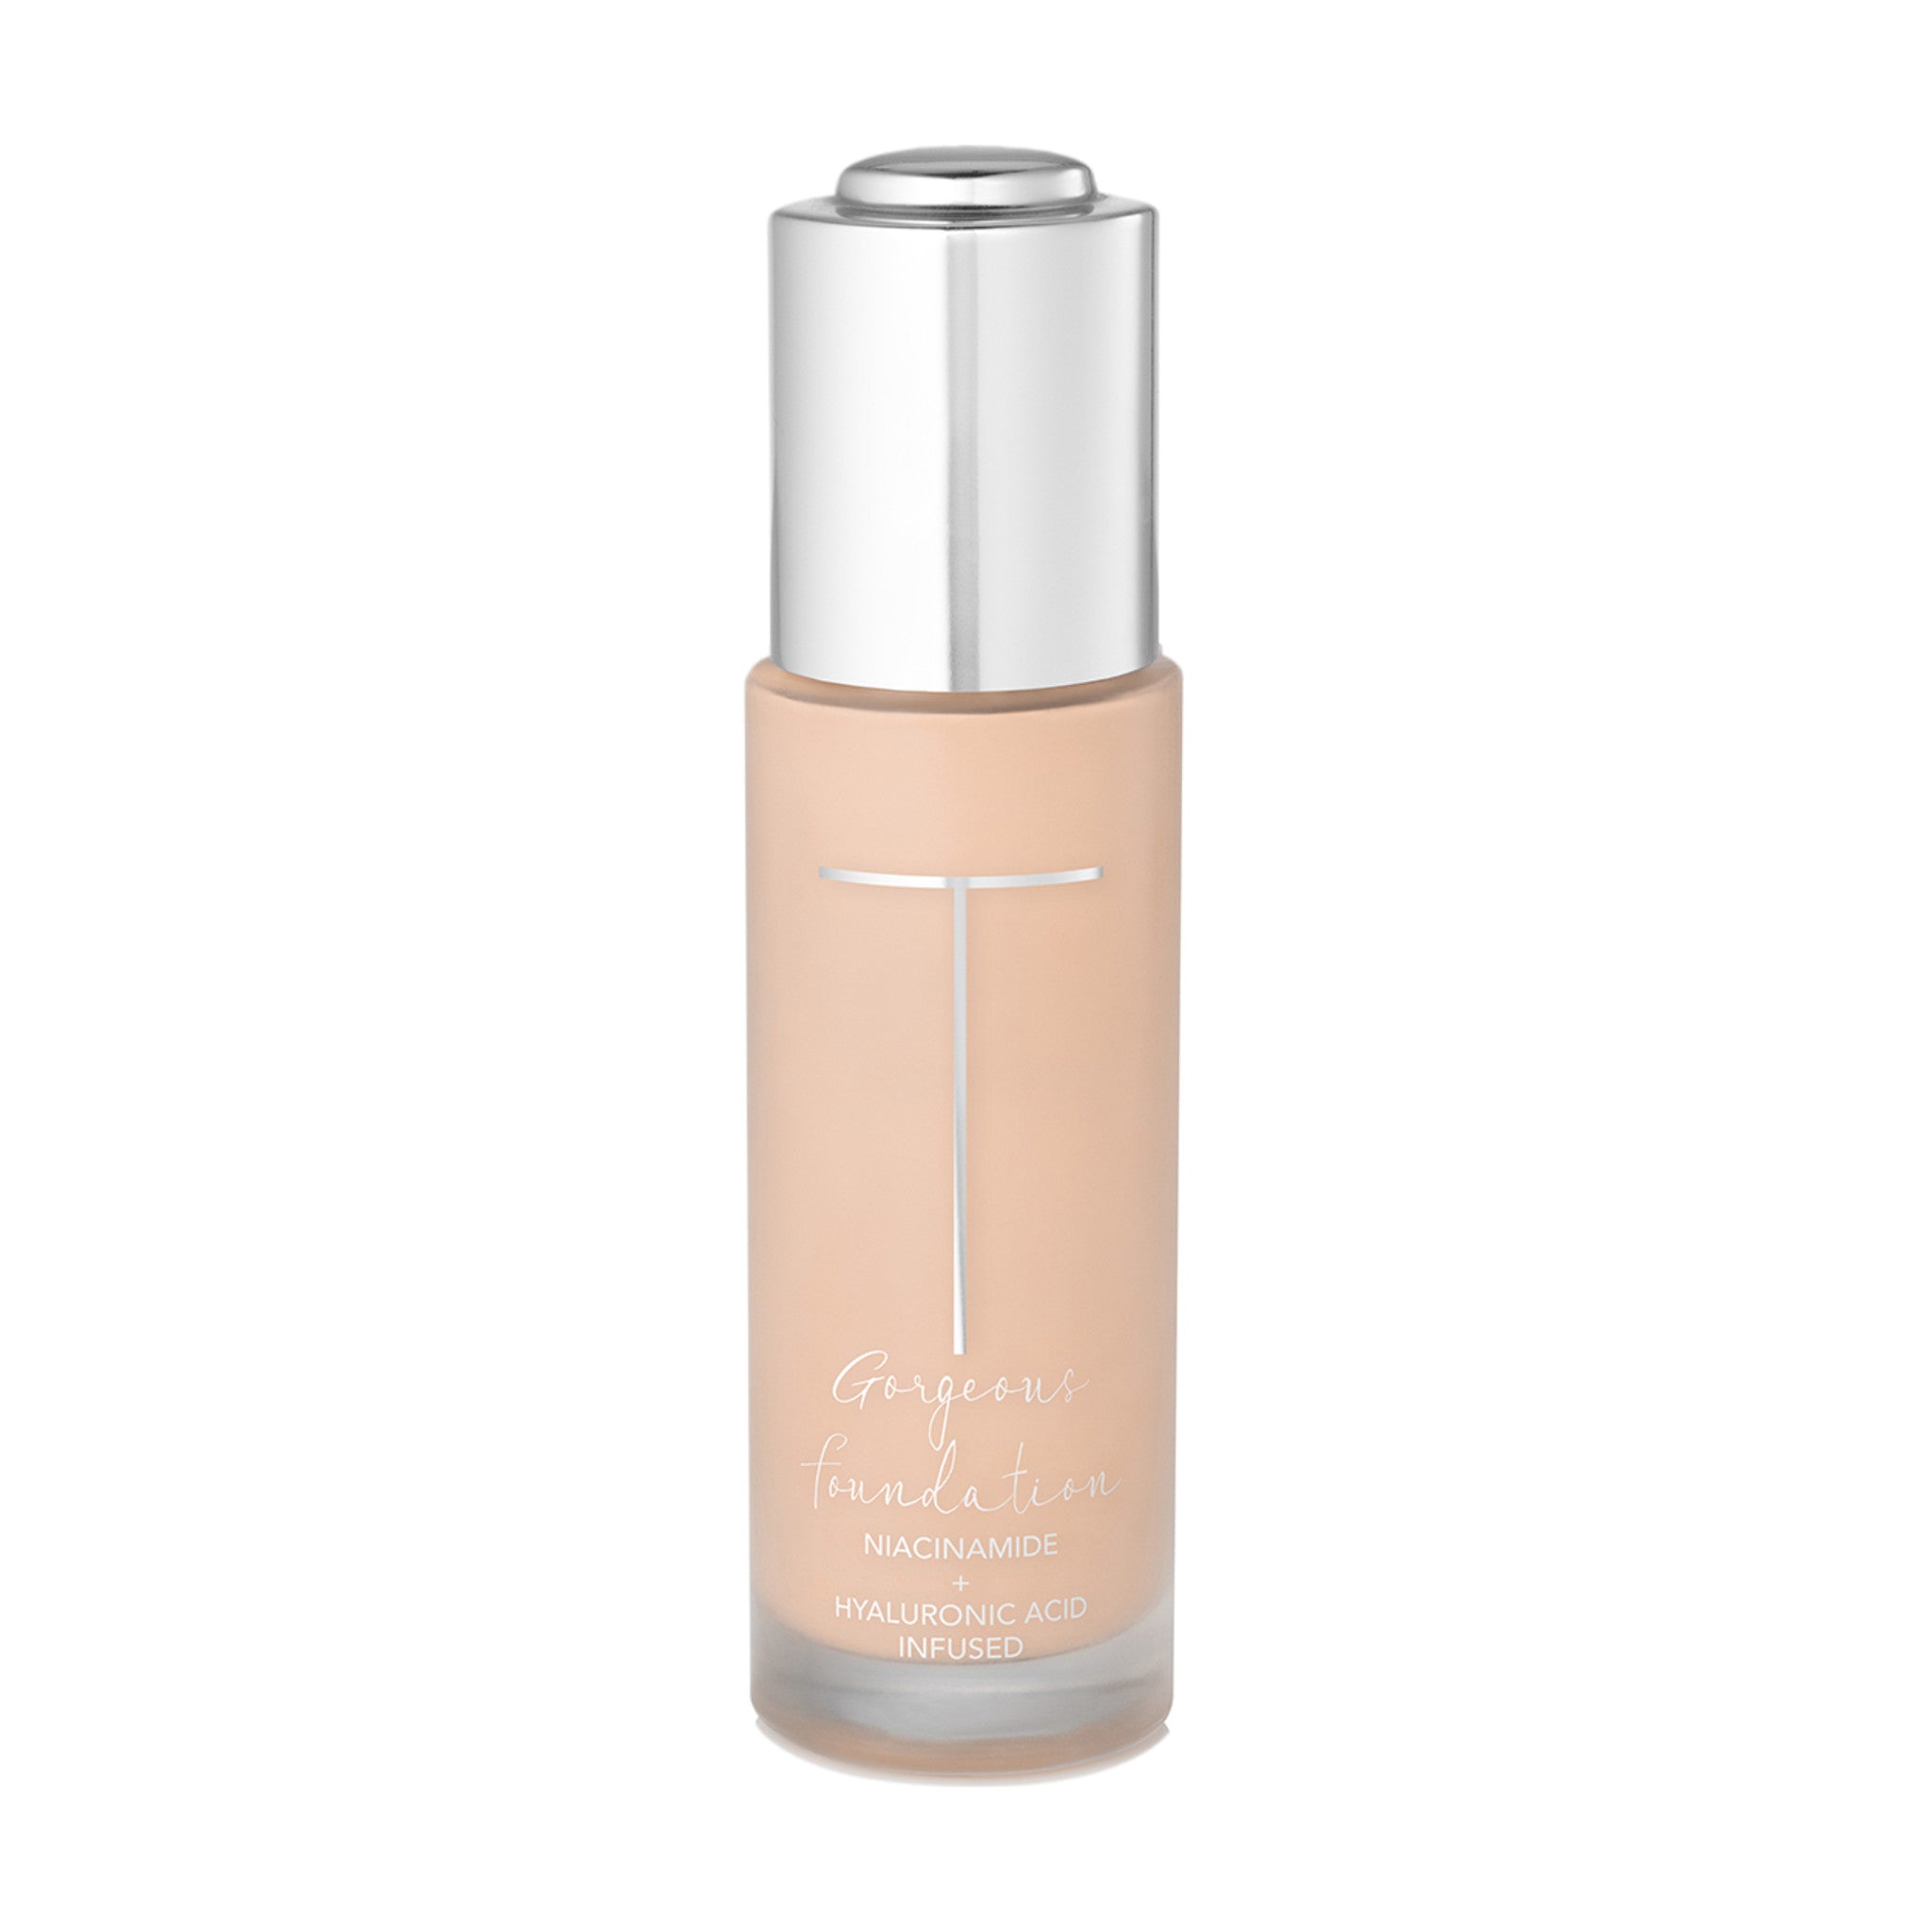 Trish McEvoy Gorgeous Even Skin Foundation Color/Shade variant: 1FW - Fair with warm undertones, for the palest skin main image. This product is in the color nude, for light warm complexions